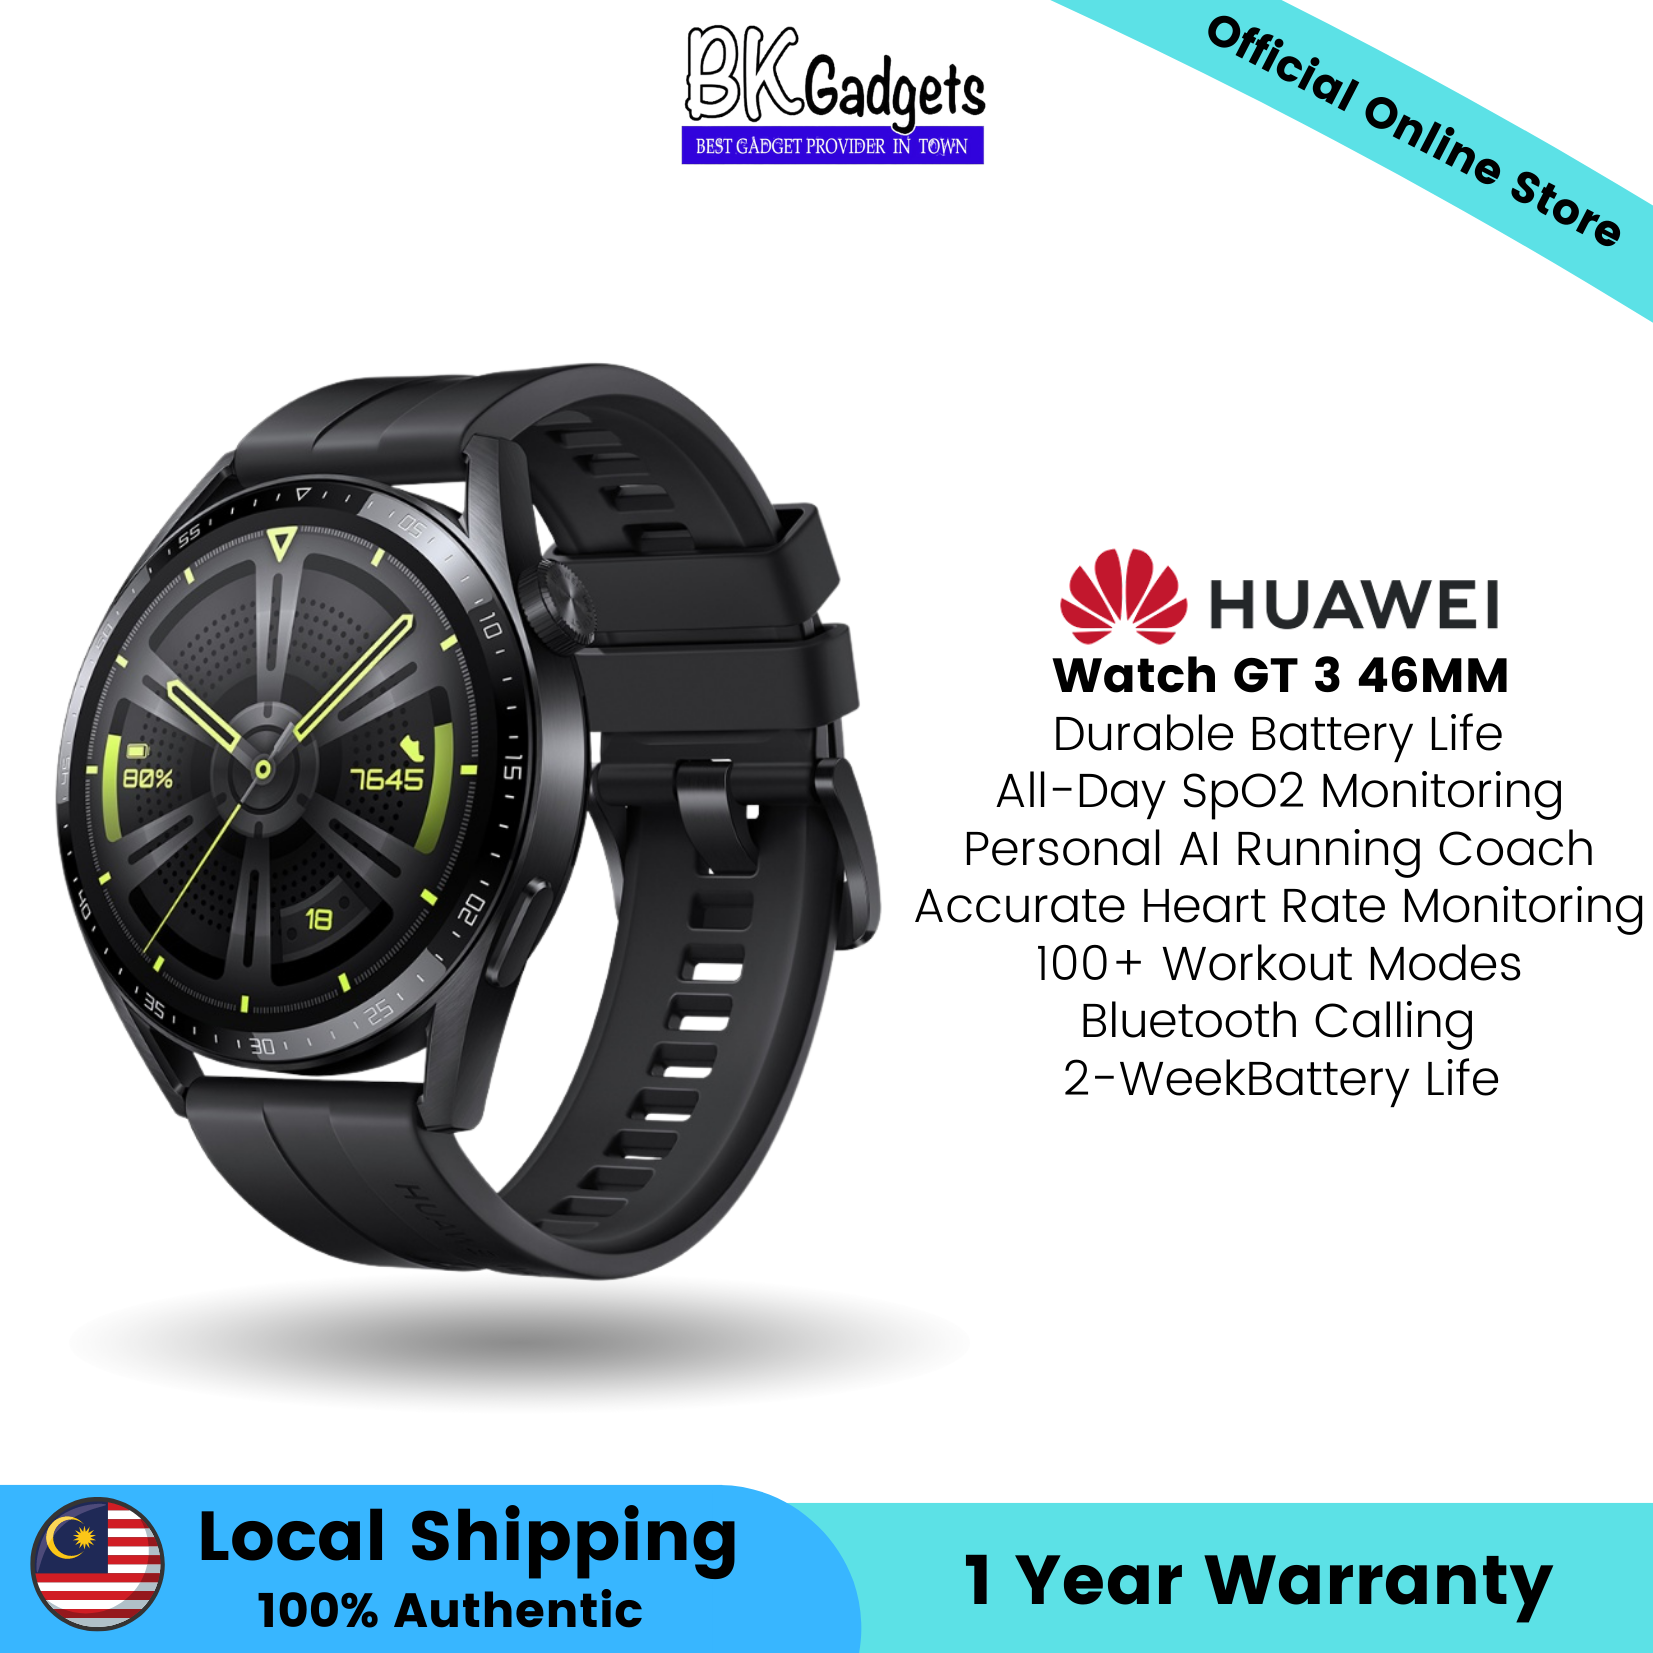 Huawei Watch GT 3 46MM Black - All-Day SpO2 Monitoring | 100+ Workout Modes | Bluetooth Calling